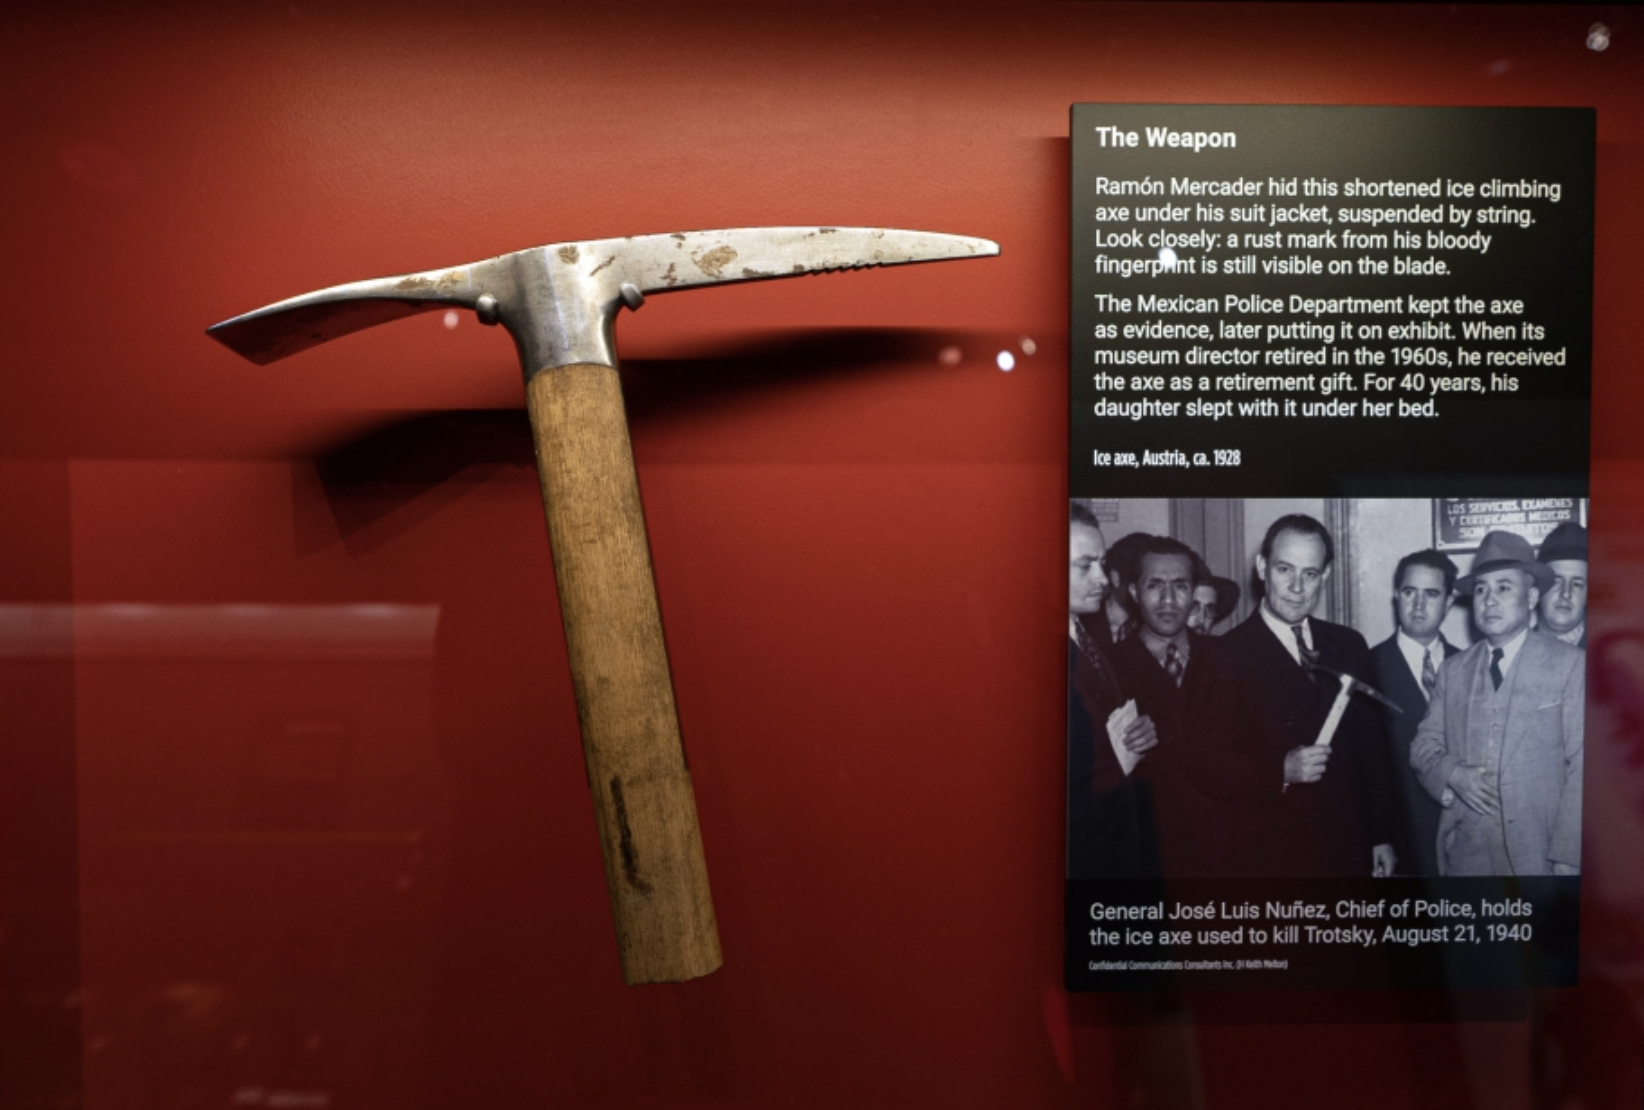 stonemason's hammer - The Weapon Ramn Mercader hid this shortened ice climbing axe under his suit jacket, suspended by string. Look closely a rust mark from his bloody fingerpant is still visible on the blade. The Mexican Police Department kept the axe as